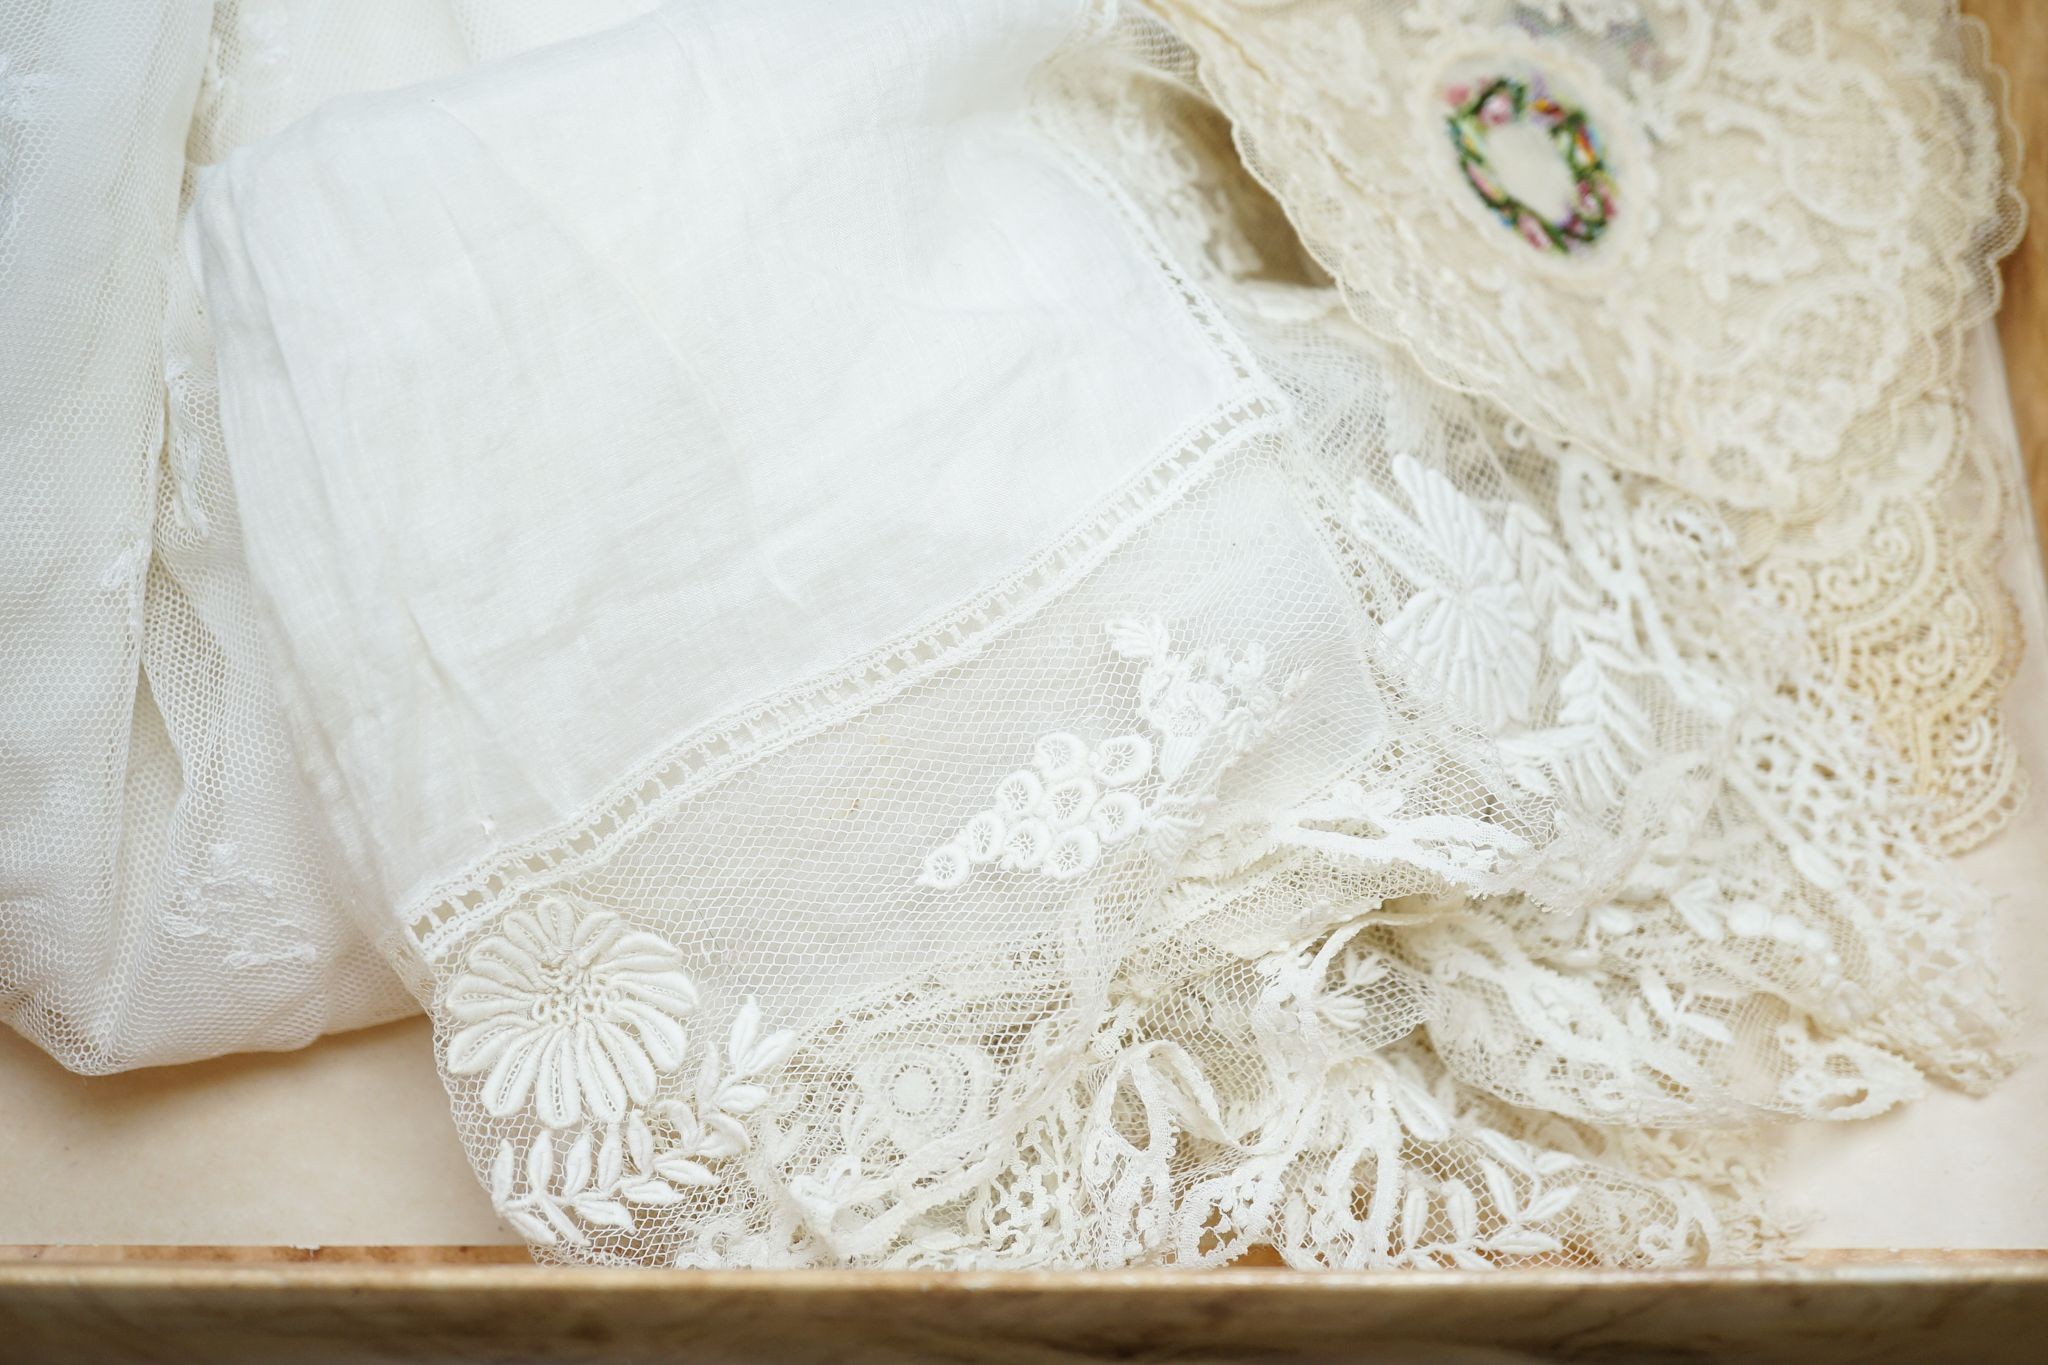 Two early 19th century, finely white worked lace hankies, various sets of lace mats and a lace - Image 5 of 5